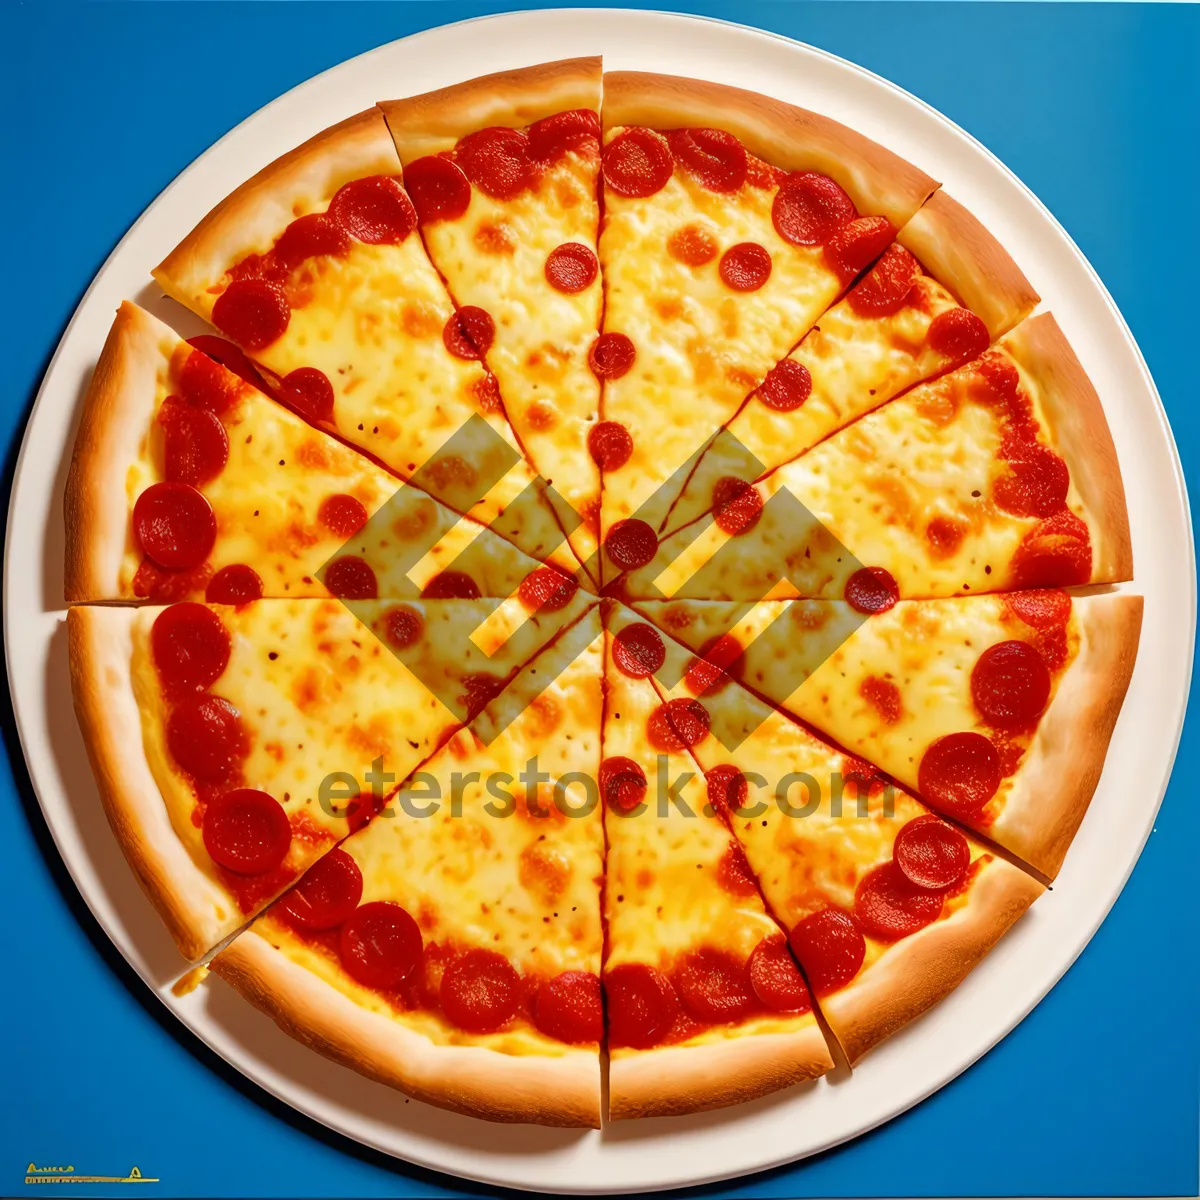 Picture of Delicious Cheese Pizza - Mouthwatering, Gourmet Slice